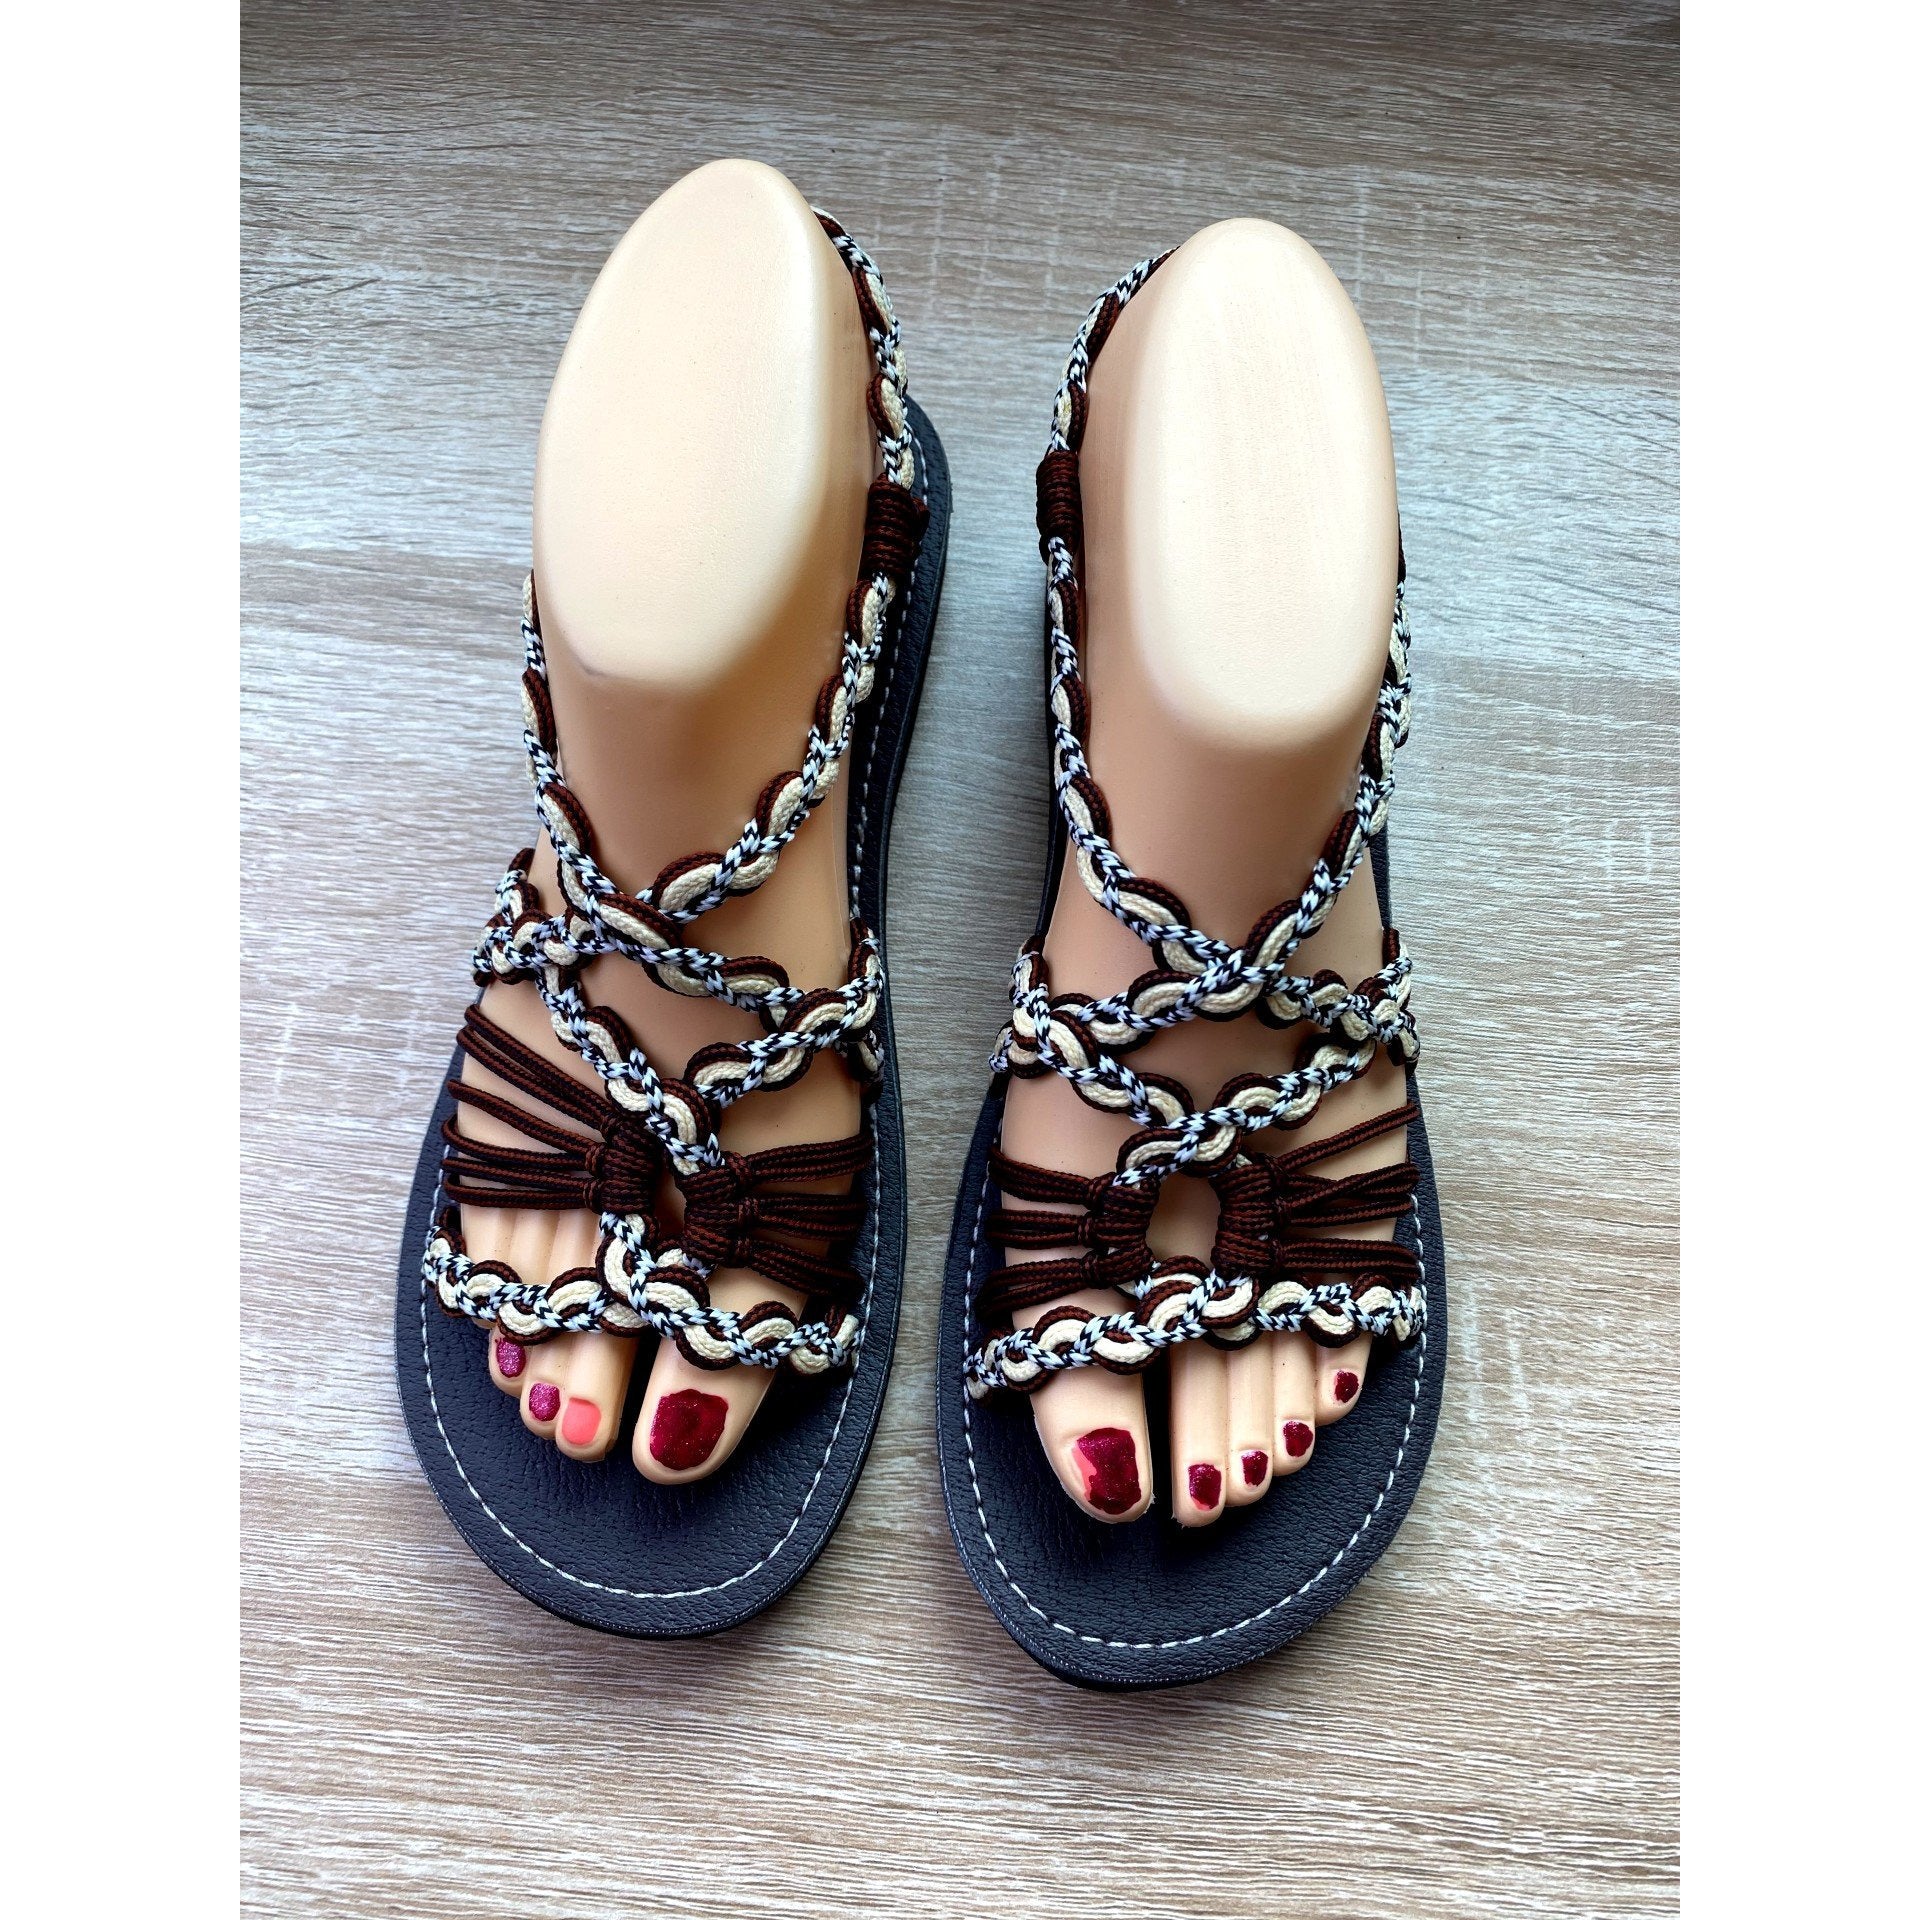 Shoes - Braided Sandals Brown/Grey